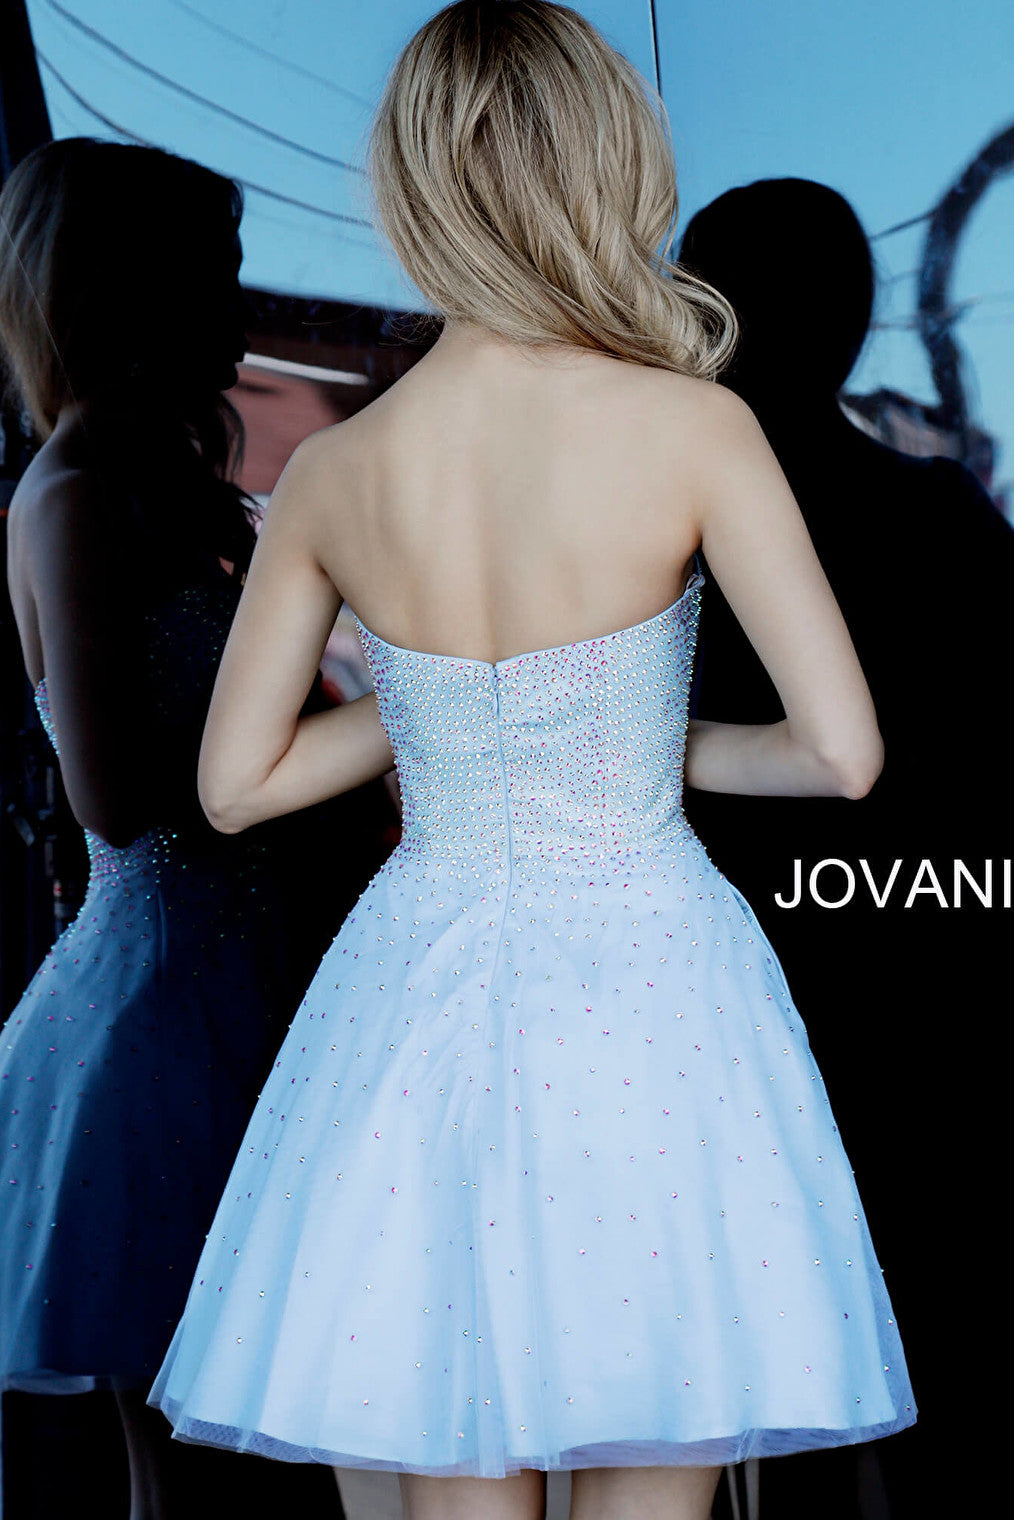 Jovani light blue fit and flare cocktail dress 2830 back view